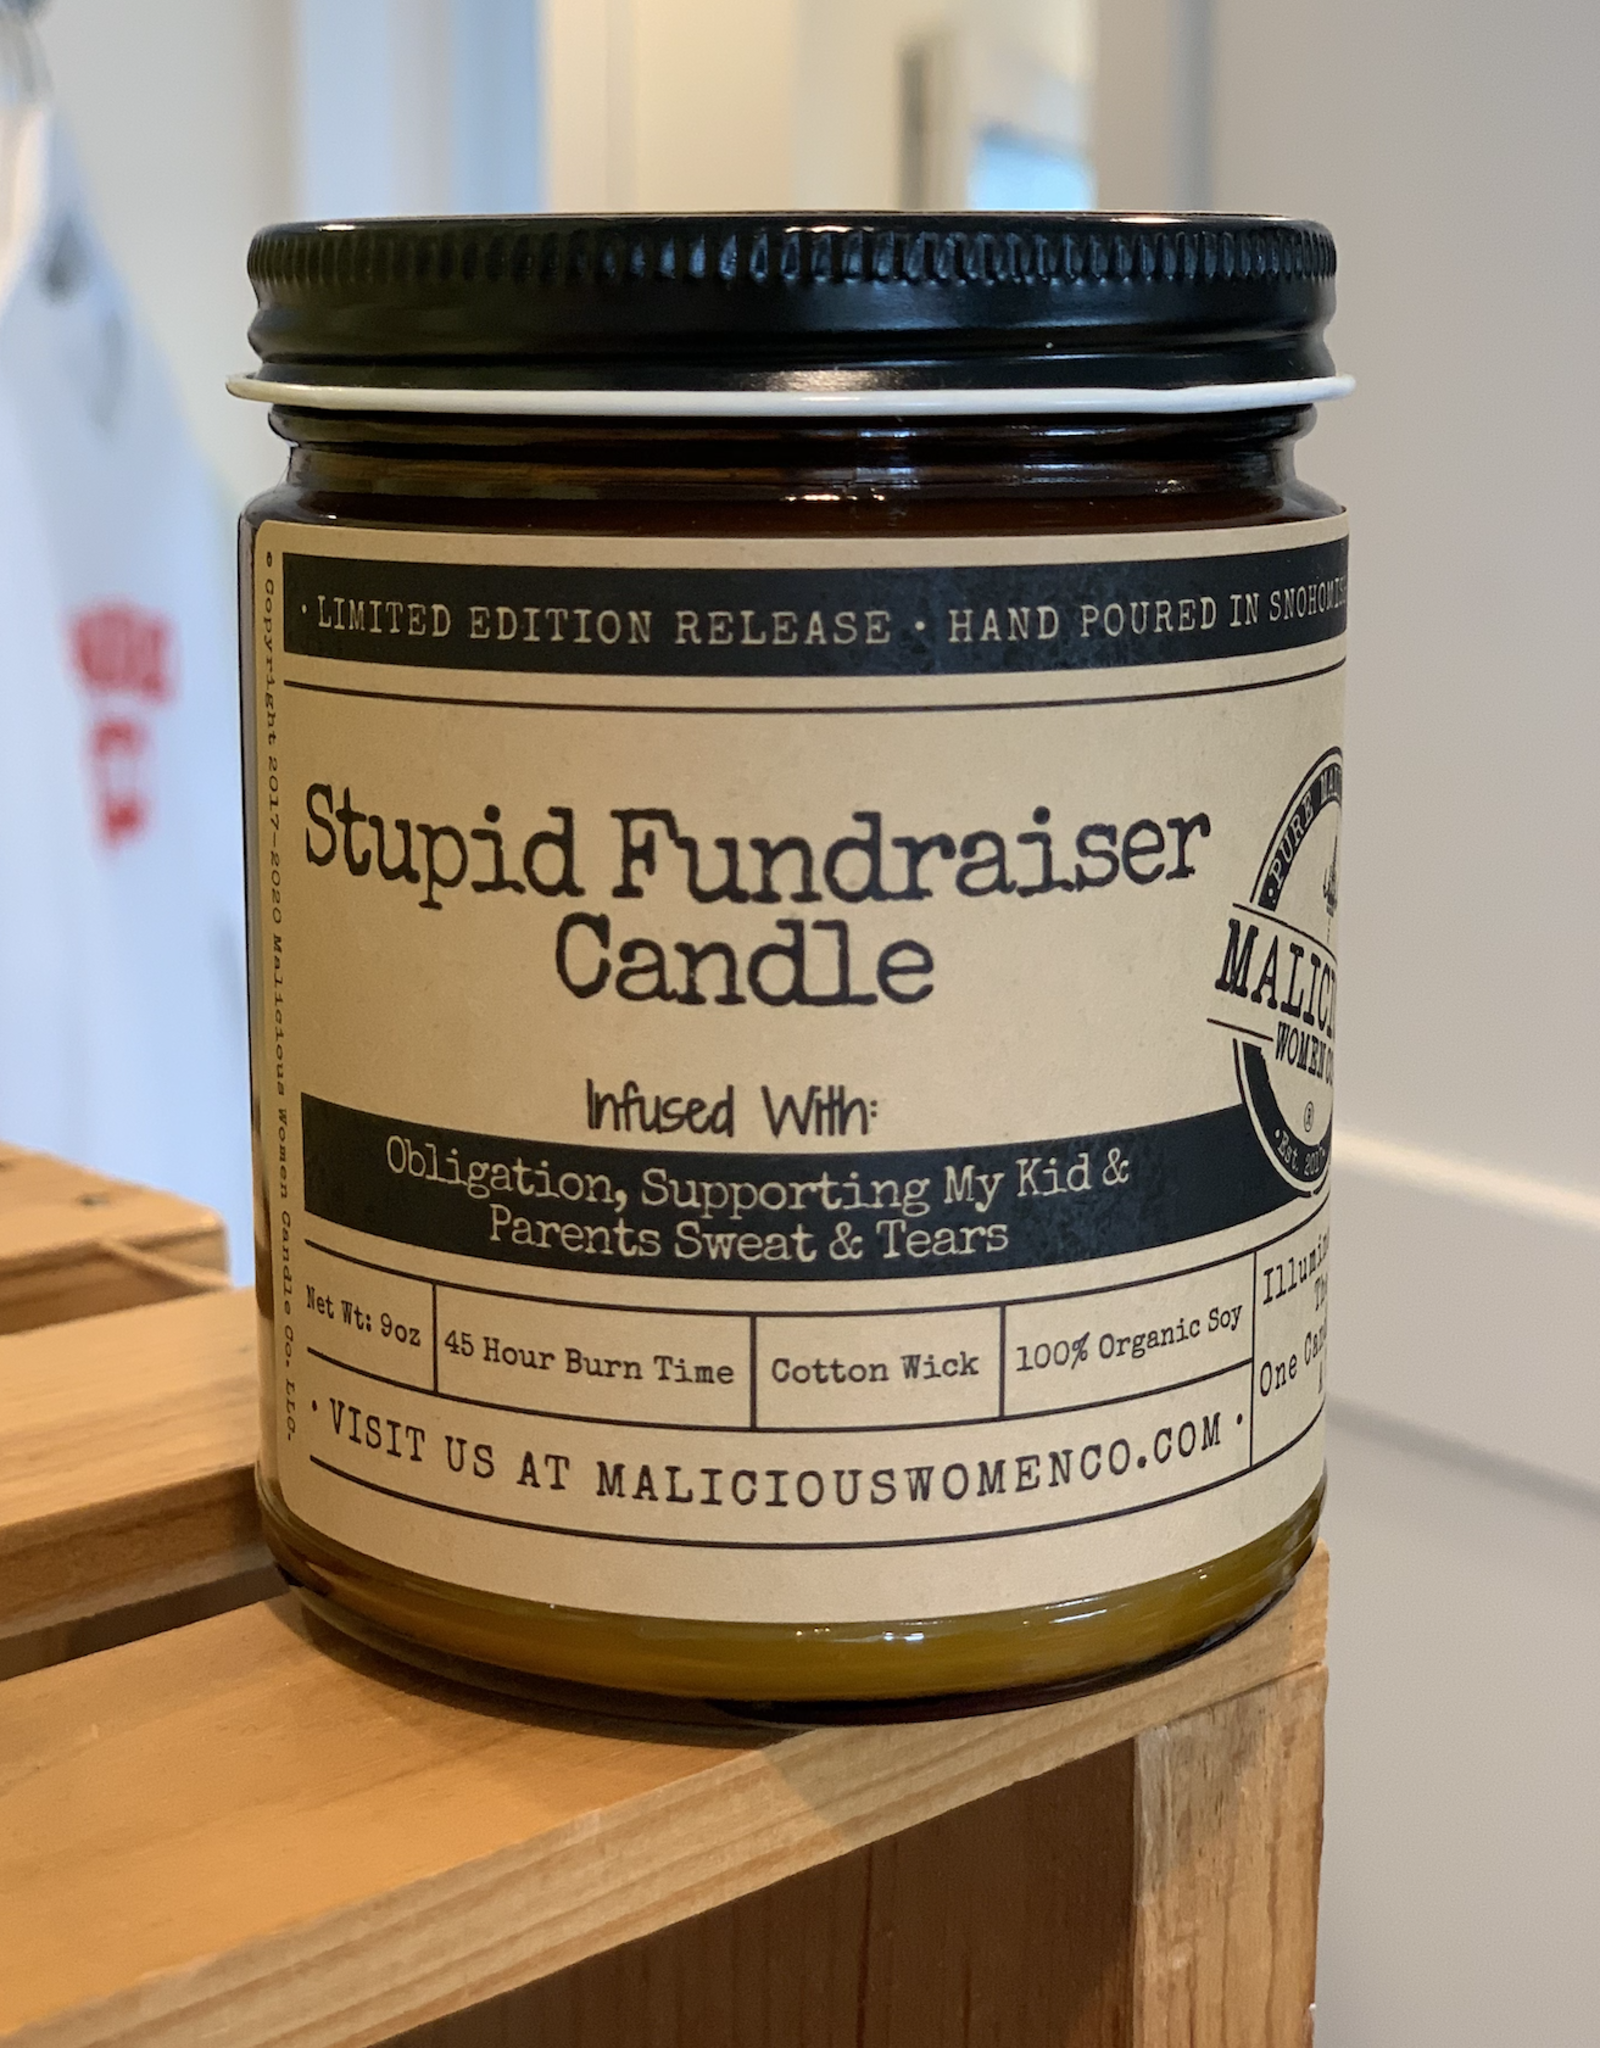 Malicious Women Fundraiser Candle